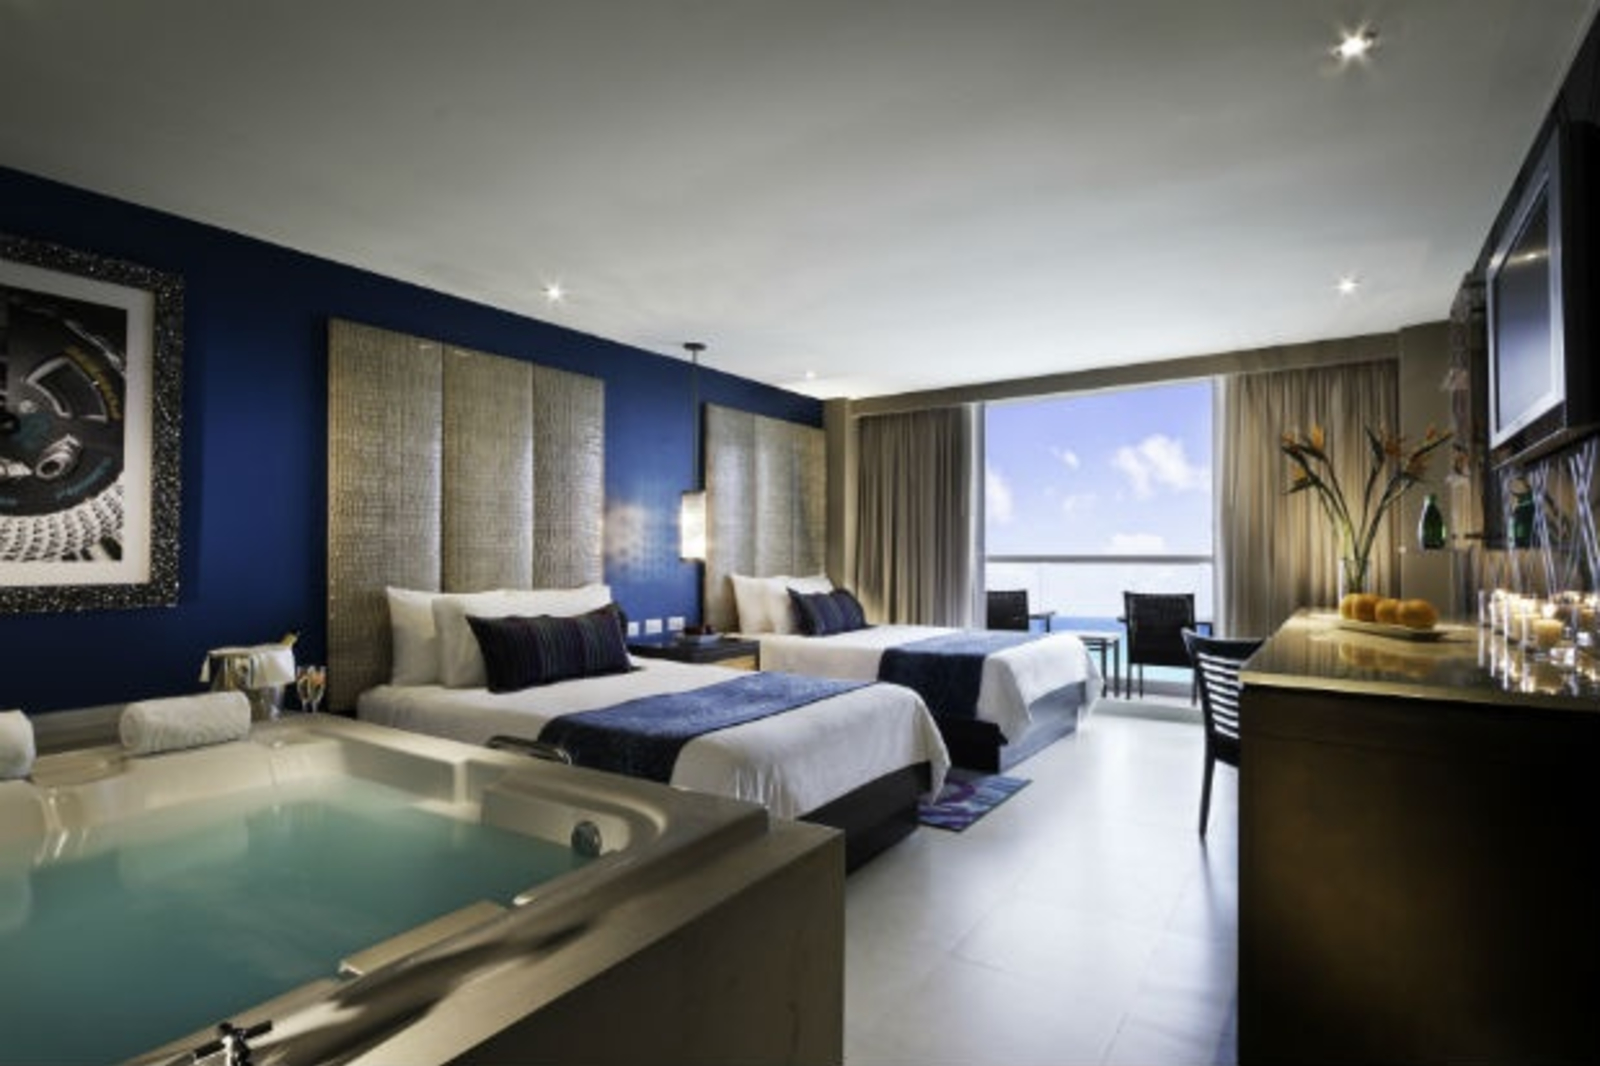 Hotel room with two single beds, a jacuzzi, and a clear ocean view